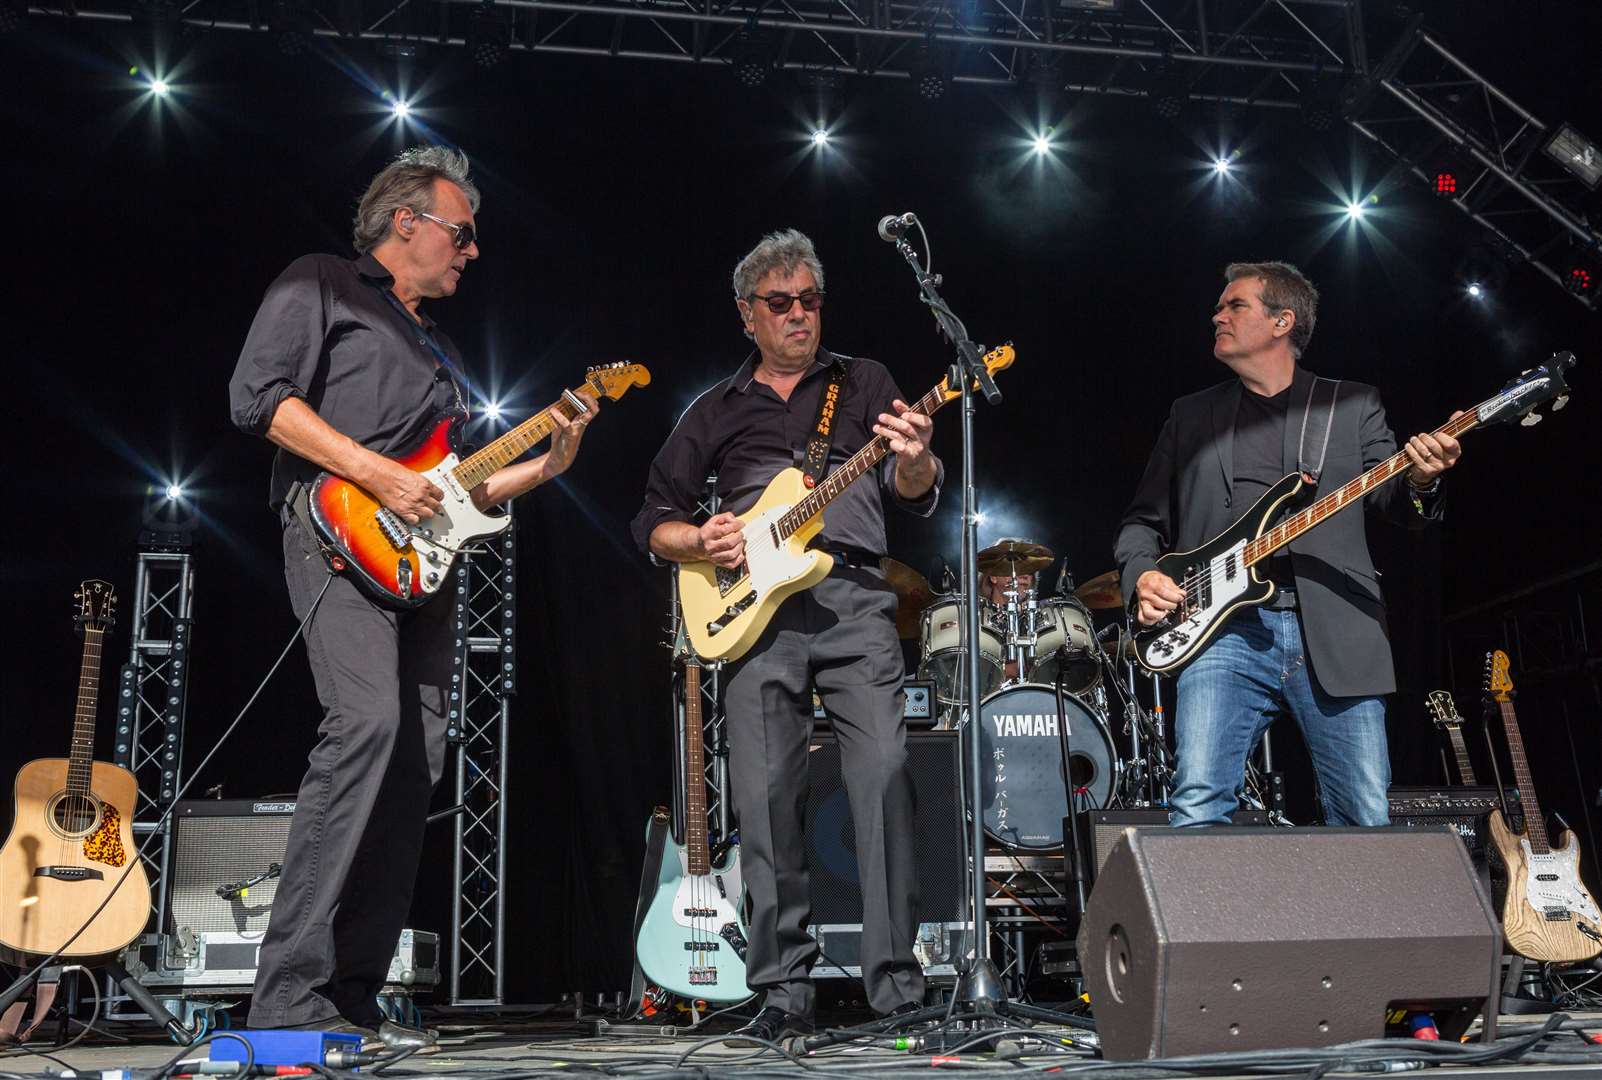 10cc on the main stage at the Hop Farm Music Festival, Hop Farm, Paddock Wood. Picture: Martin Apps